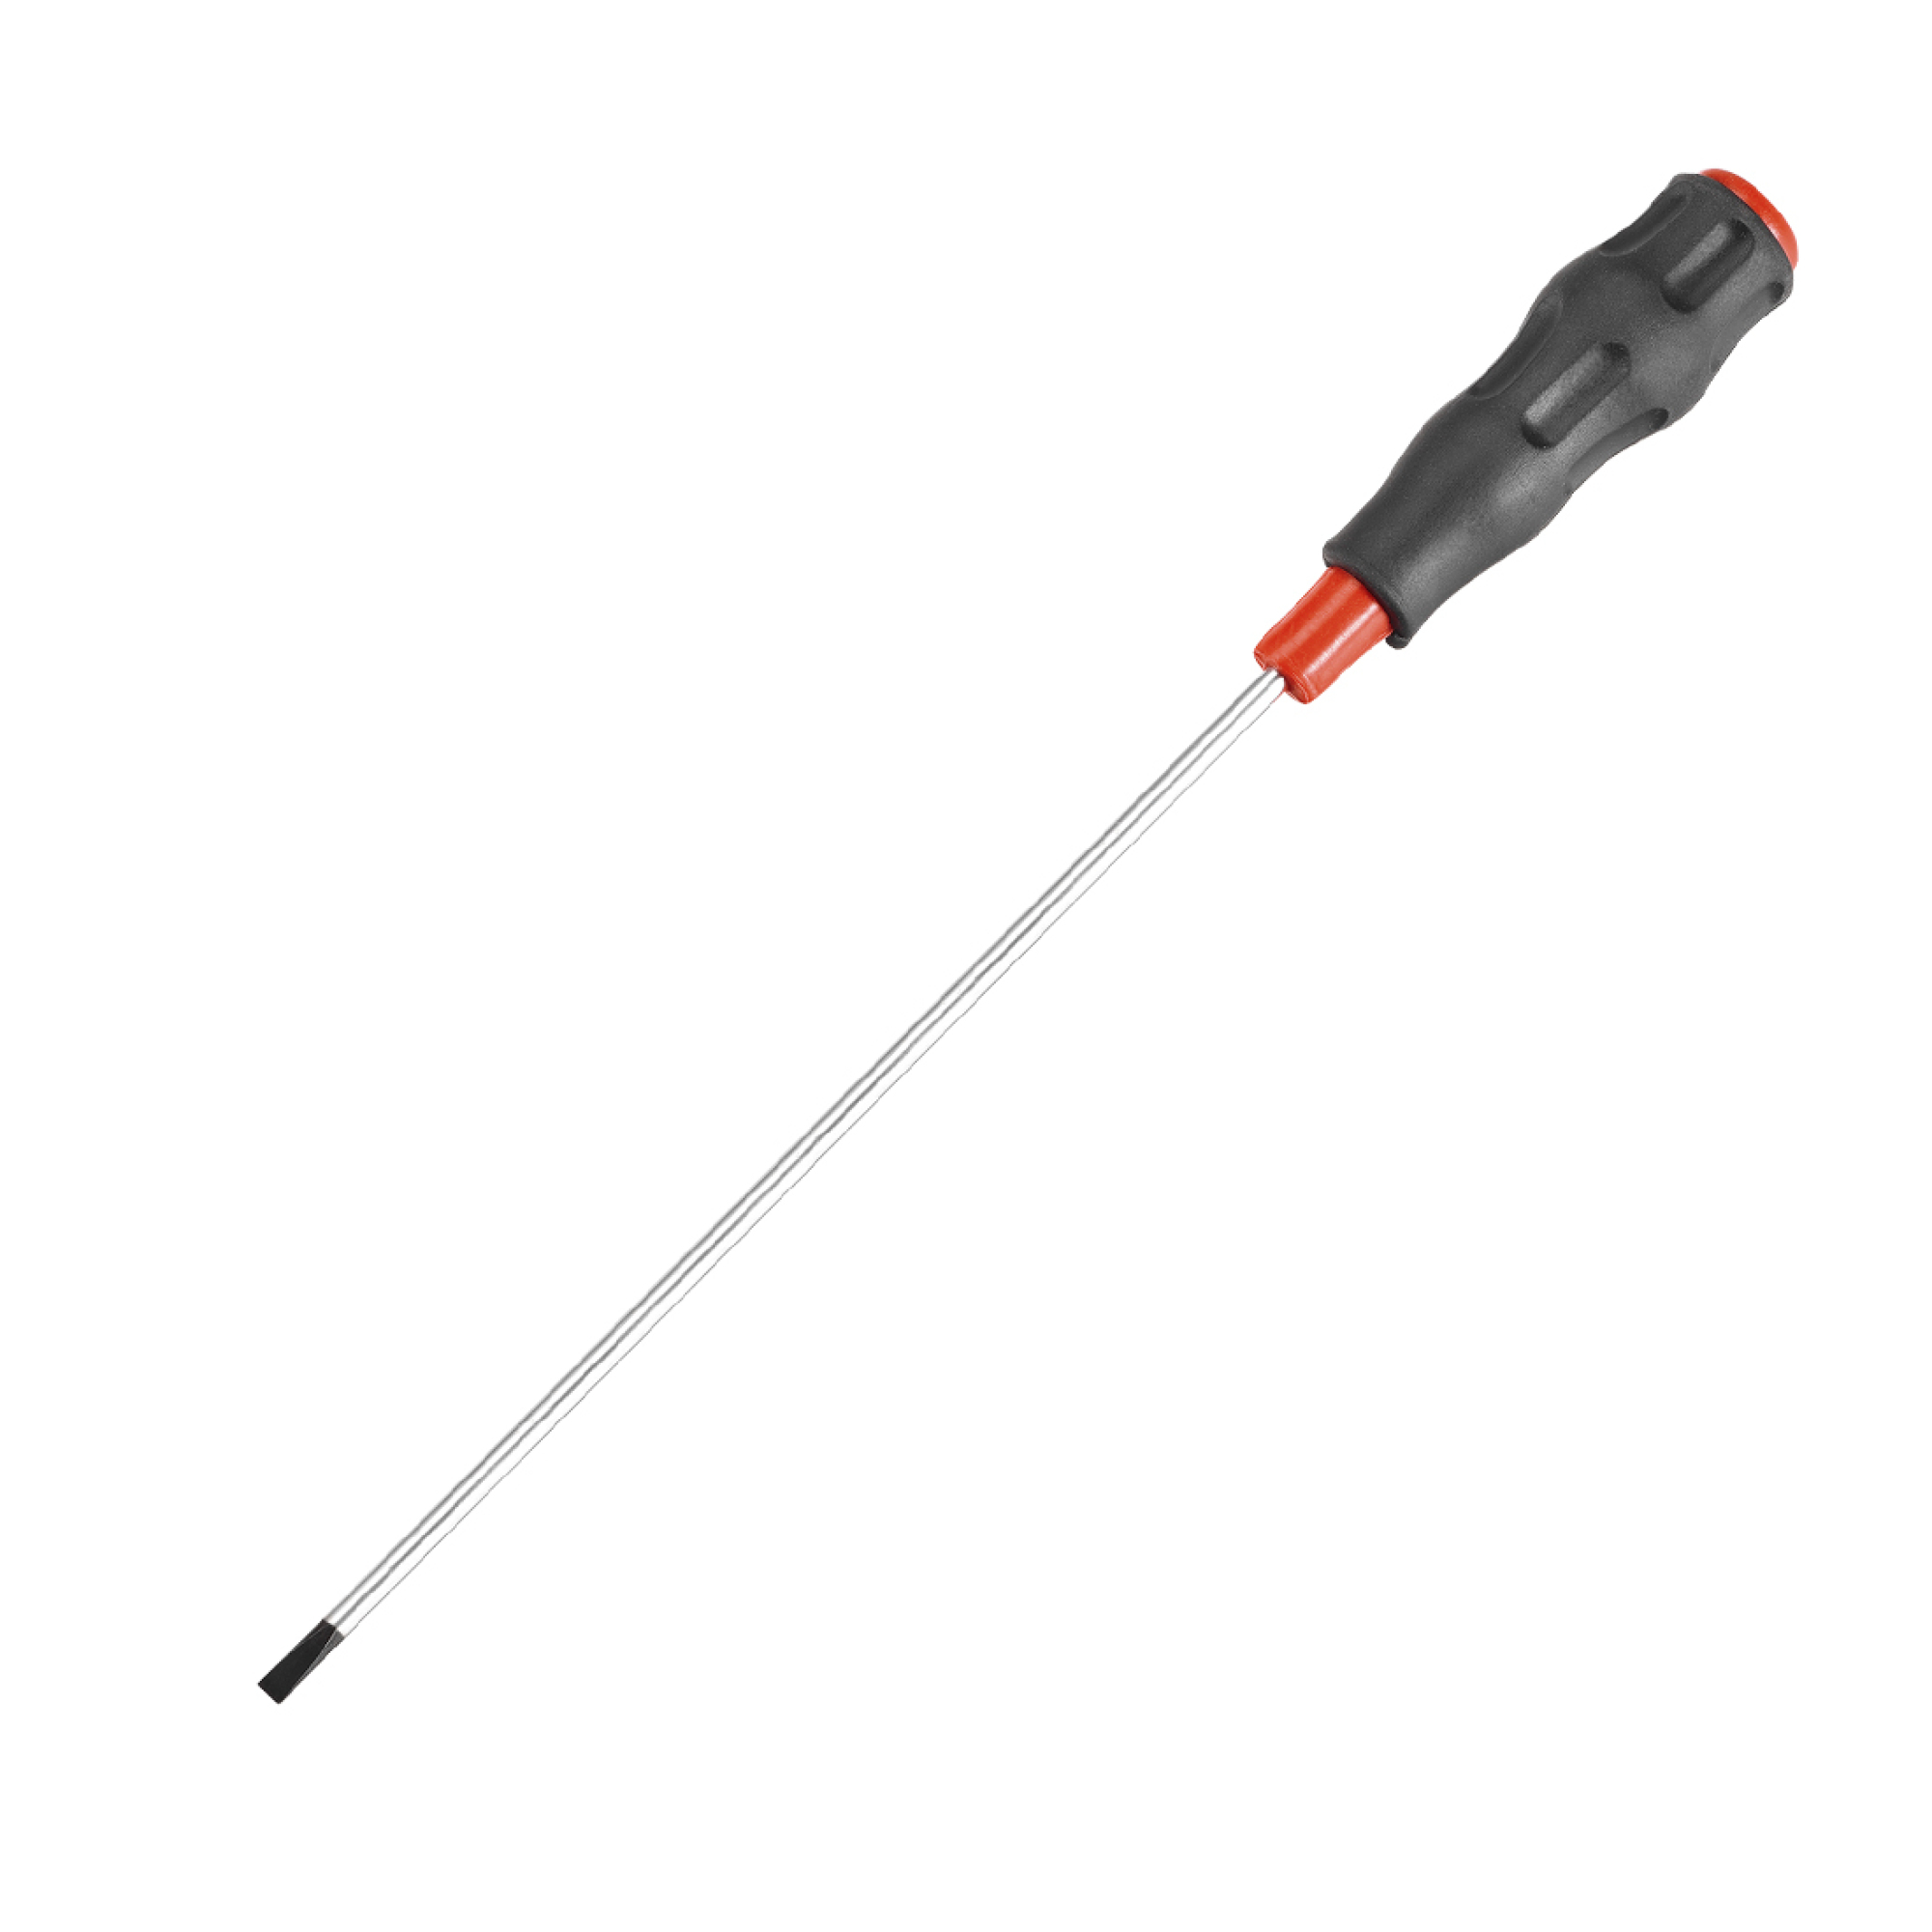 3.8mm Slotted Magnetic Screwdriver Non Slip Black+Red Handle